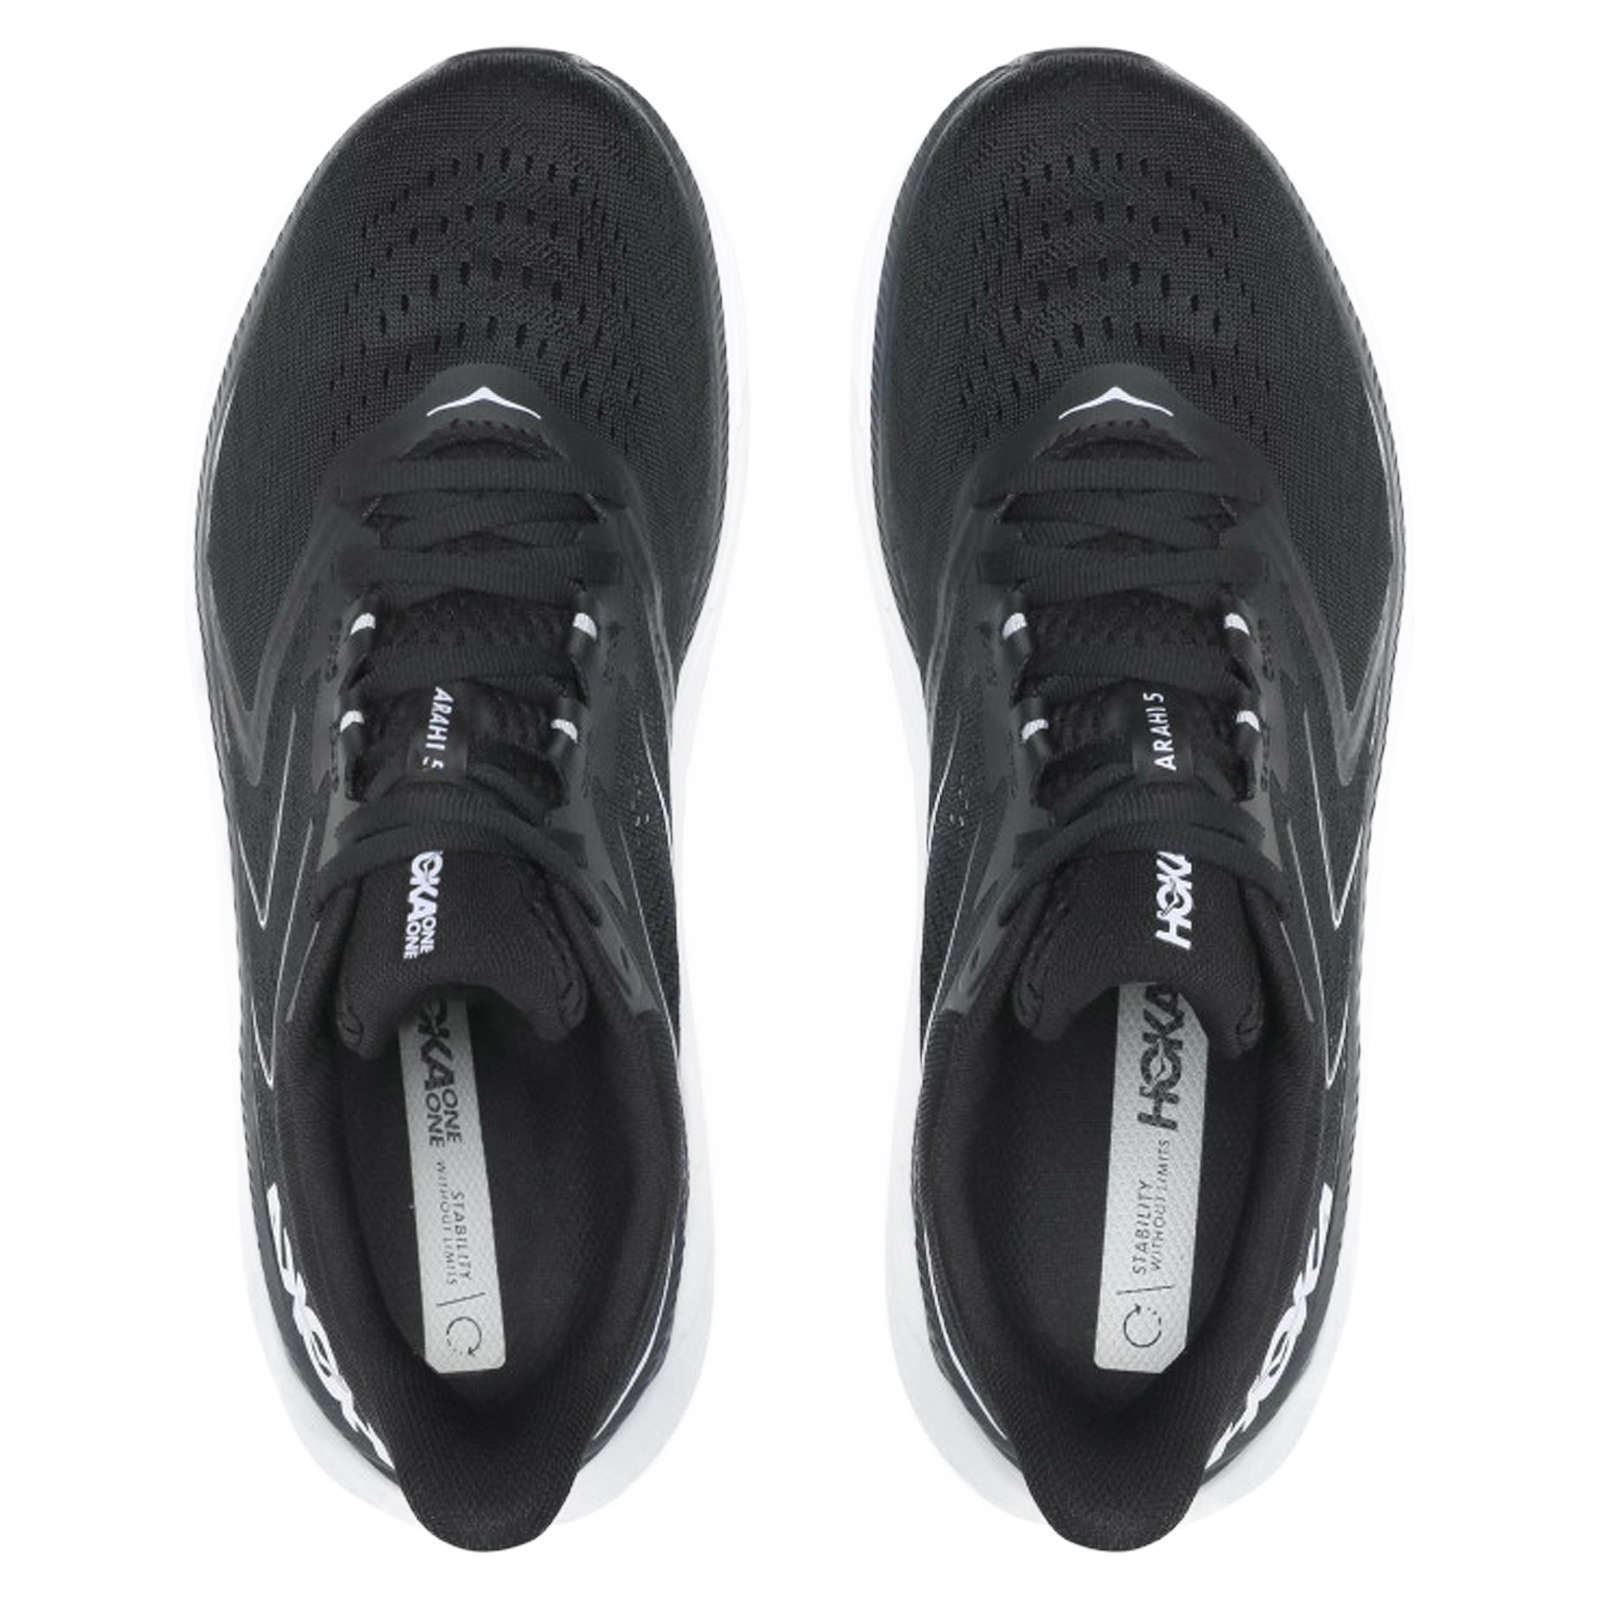 Hoka One One Arahi 5 Synthetic Textile Men's Low-Top Road Running Sneakers#color_black white